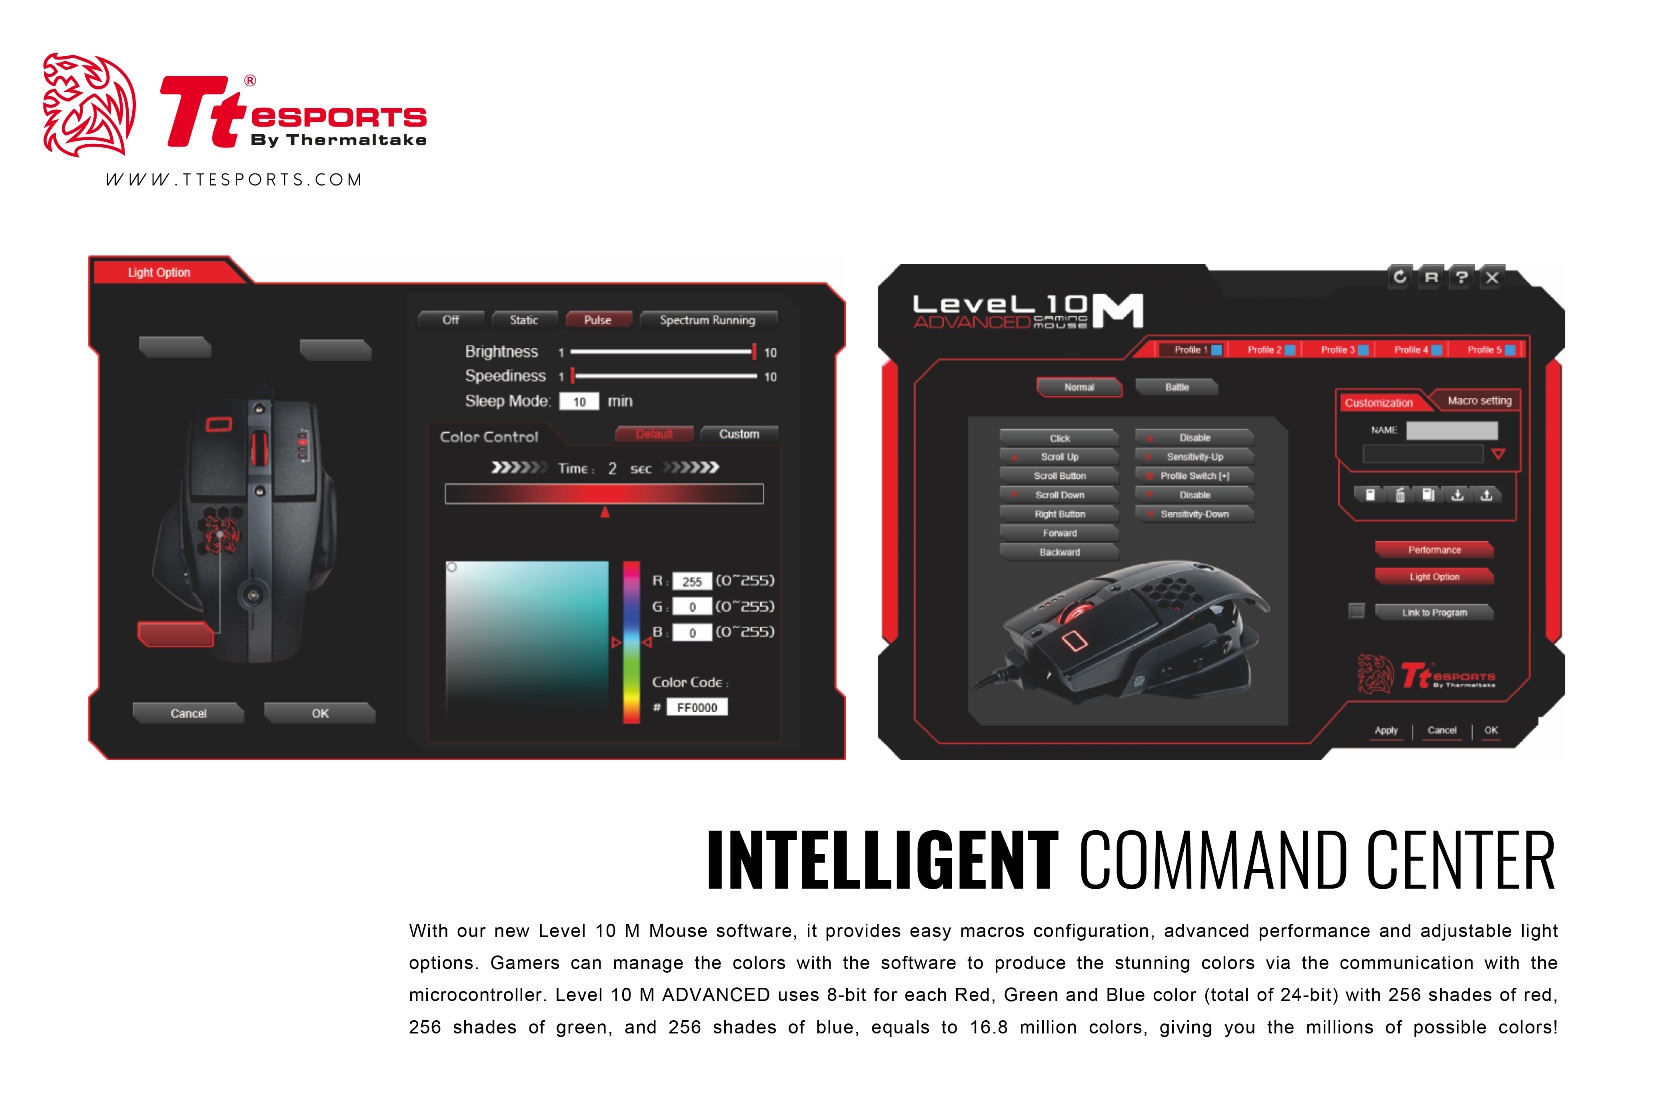 Tt eSPORTS Level 10 M Advanced Mouse Launched Gaming, Level 10 M, mouse, Thermaltake, Tt eSports 1